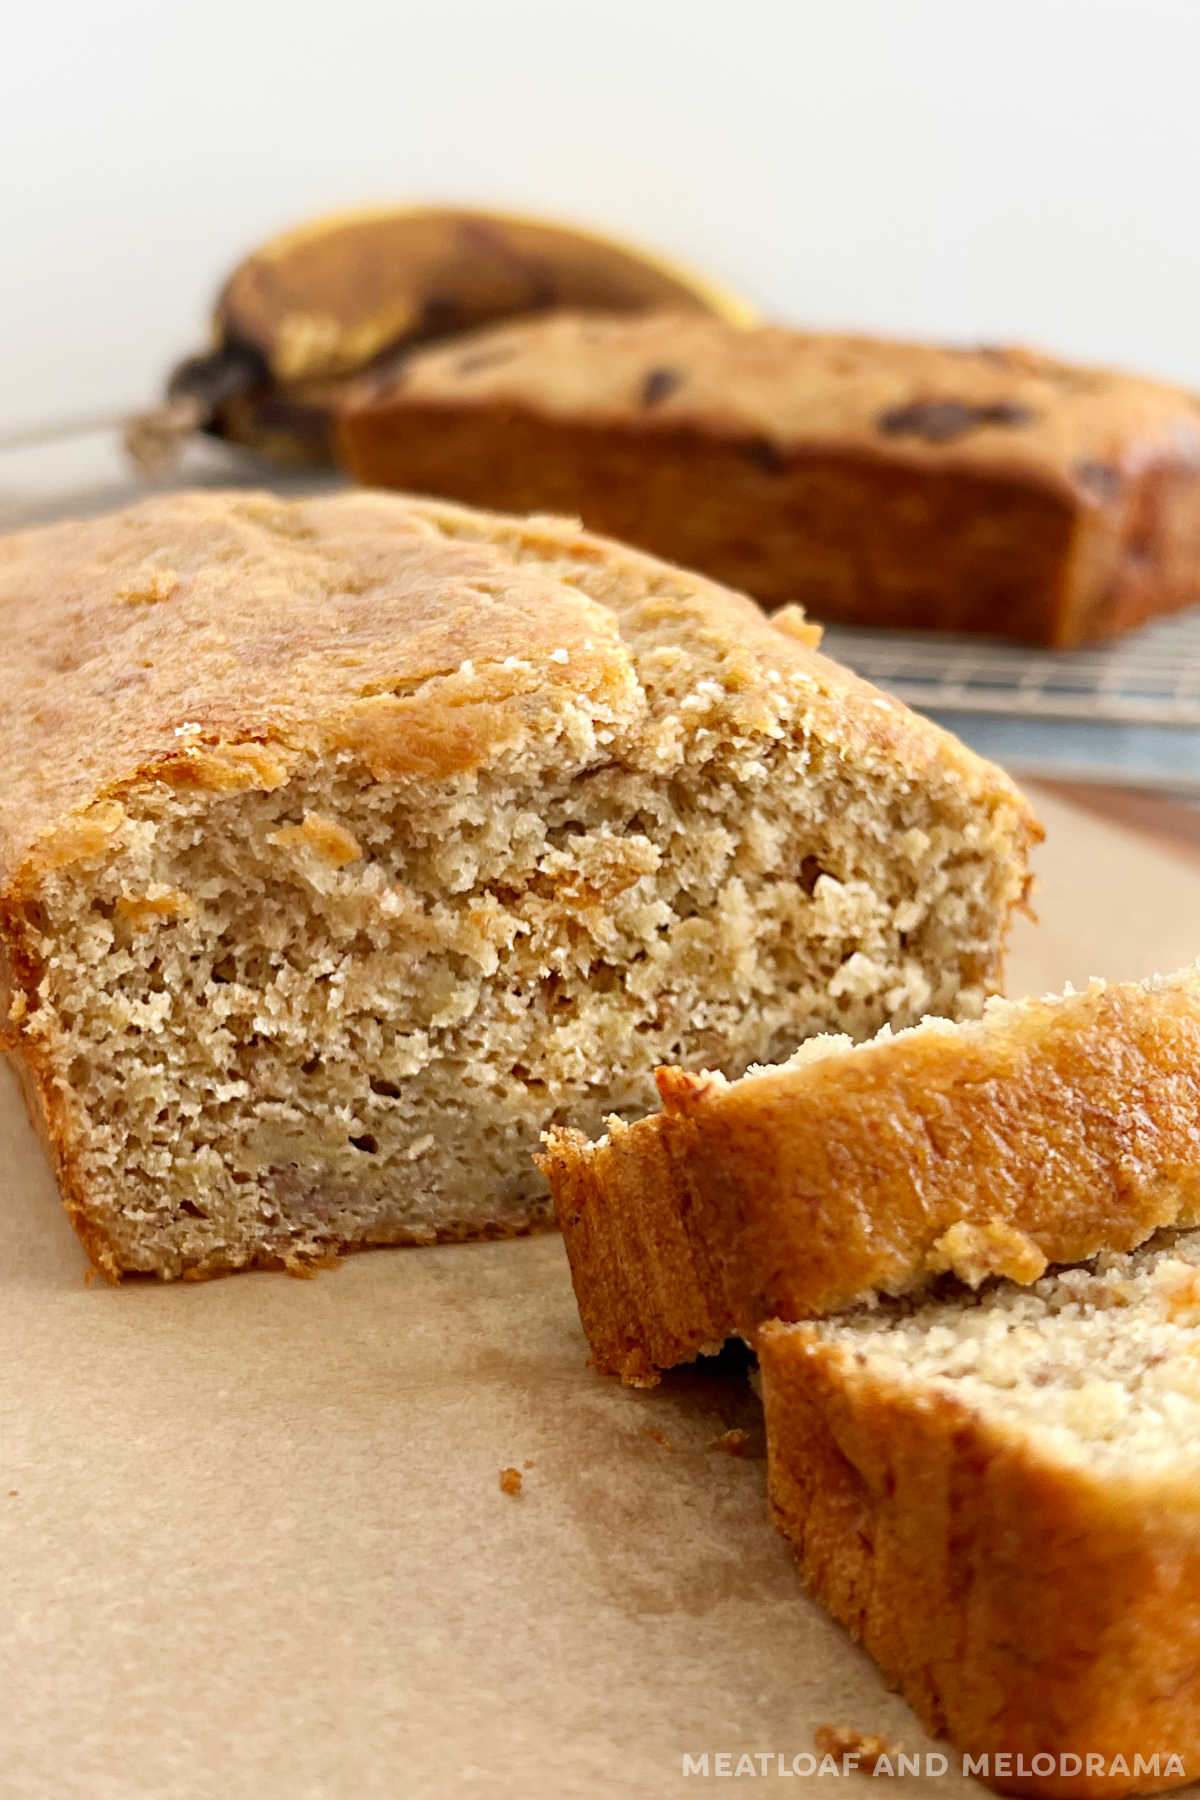 Easy 3 Ingredient Banana Bread Recipe - From Orchard Slope